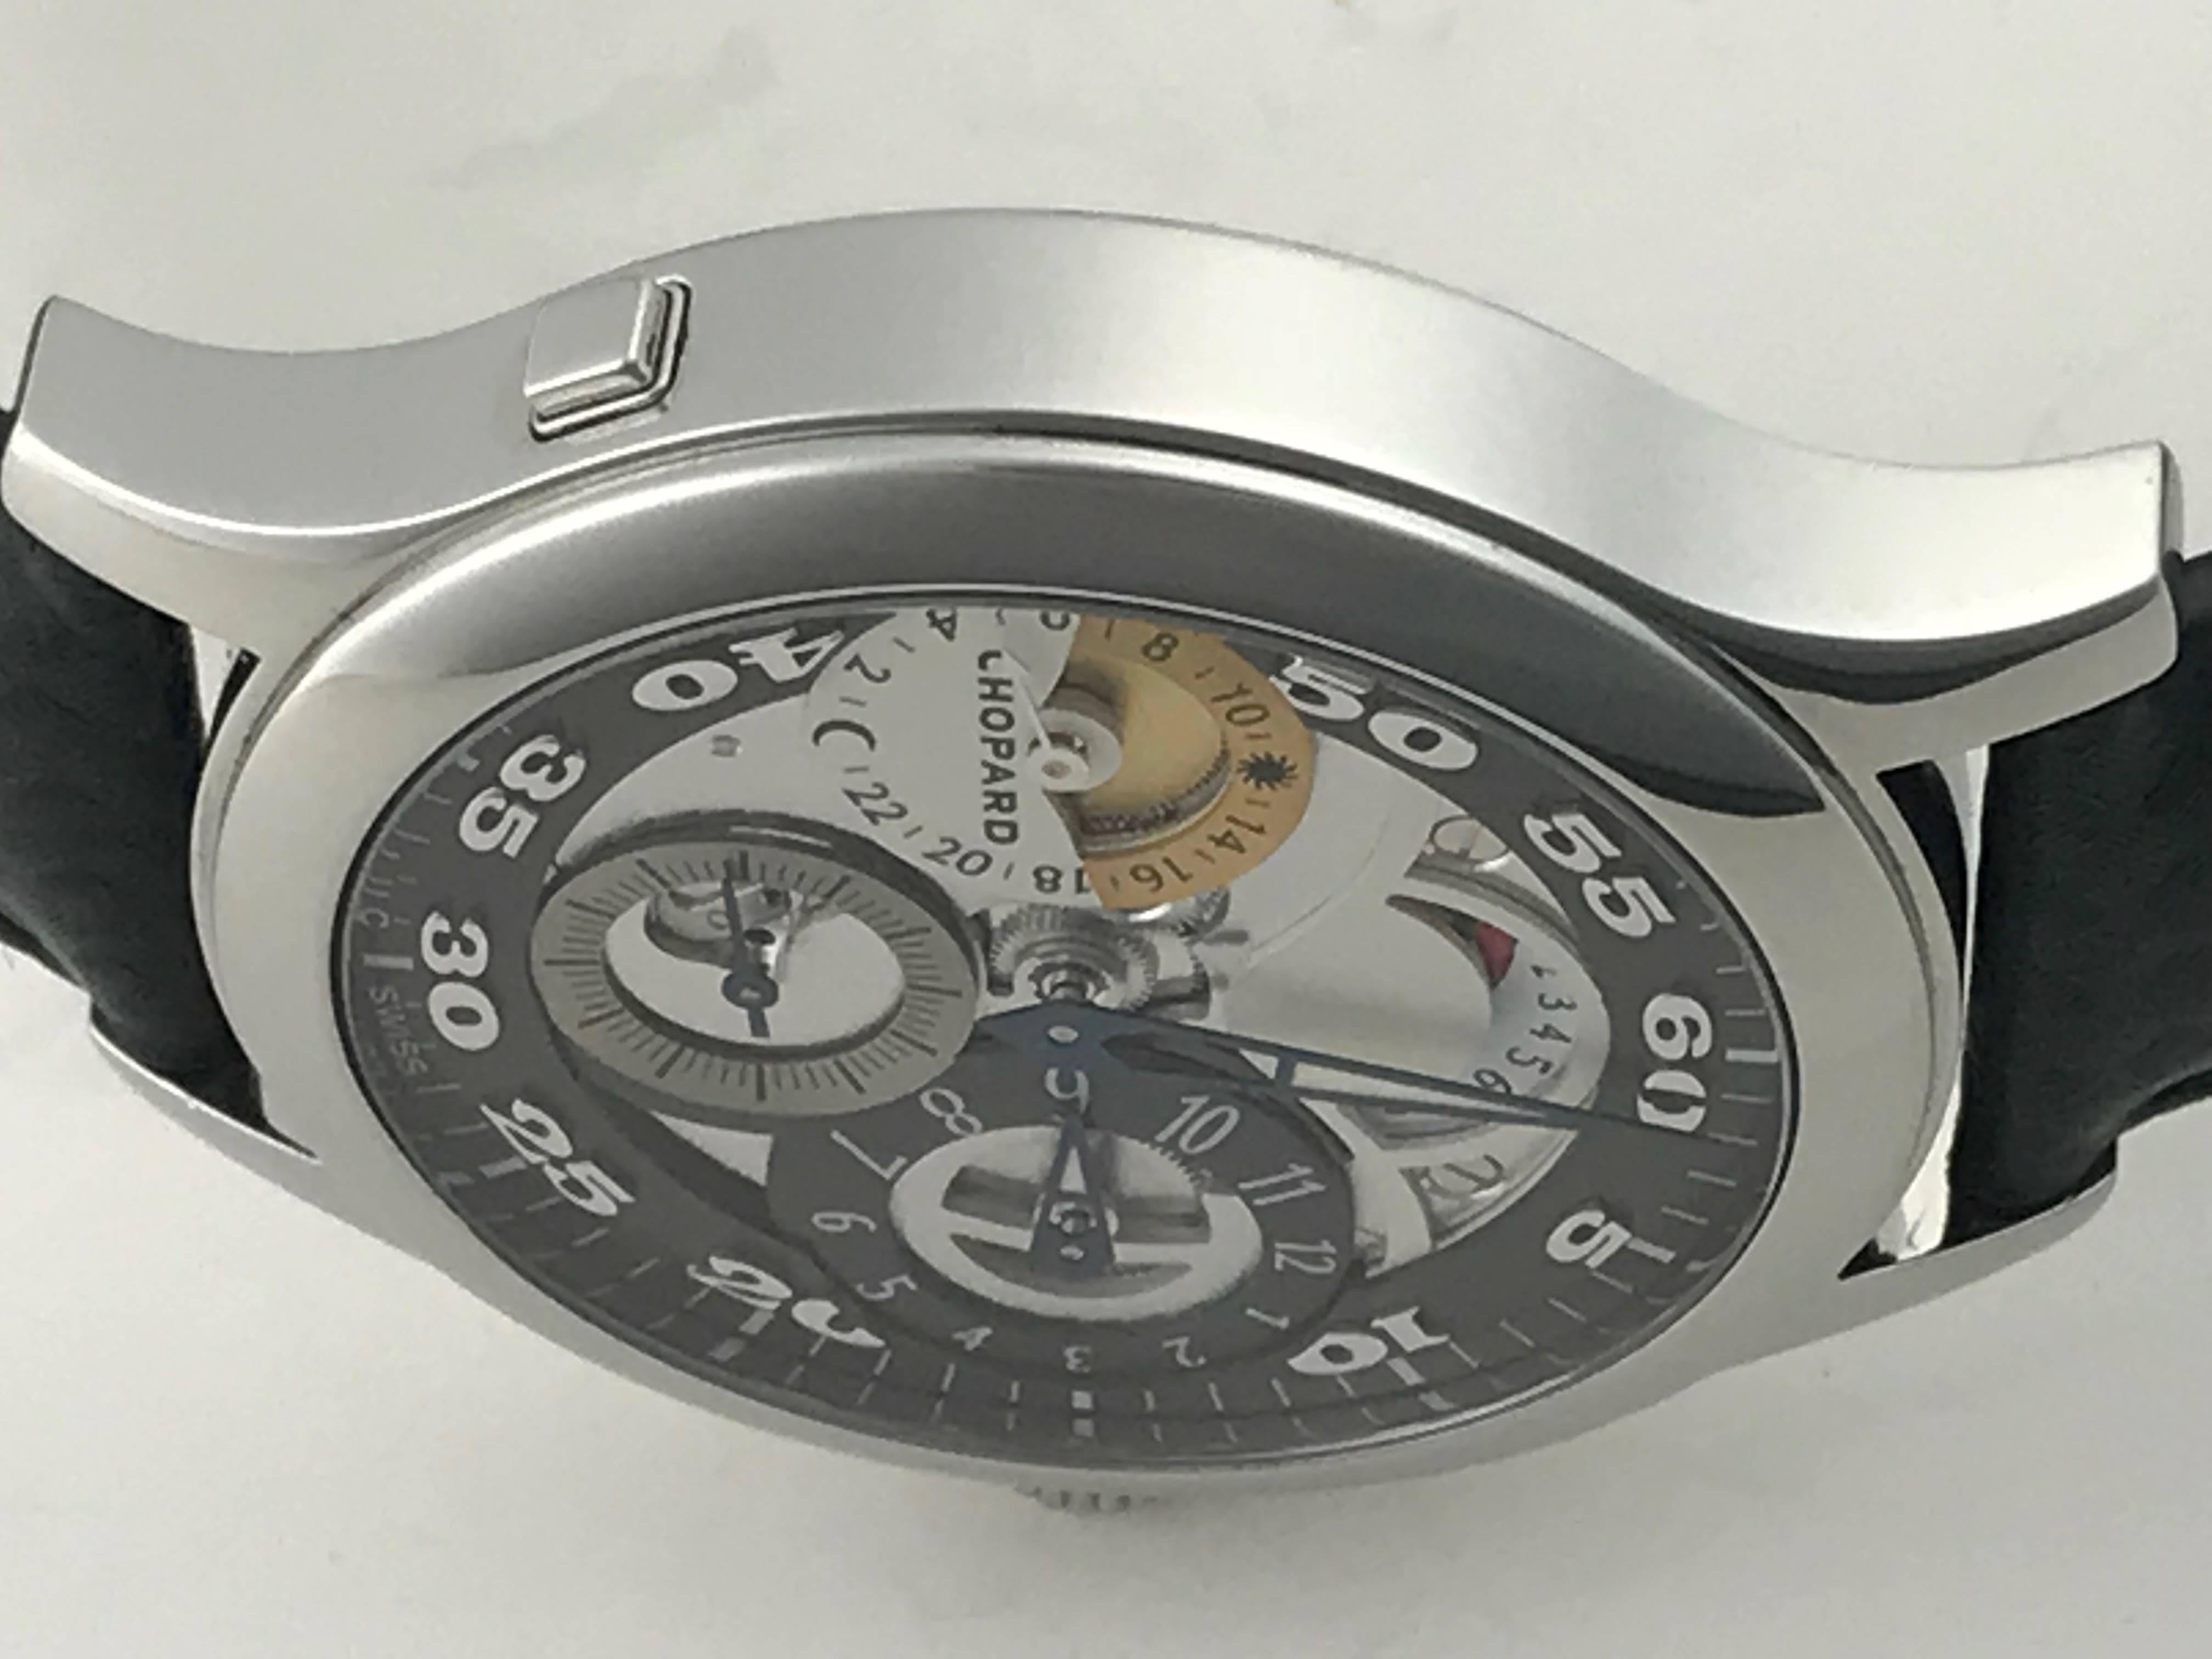 Chopard Stainless Steel L.U.C Tech Regulator GMT Power Reserve Manual Wristwatch In Excellent Condition For Sale In Dallas, TX